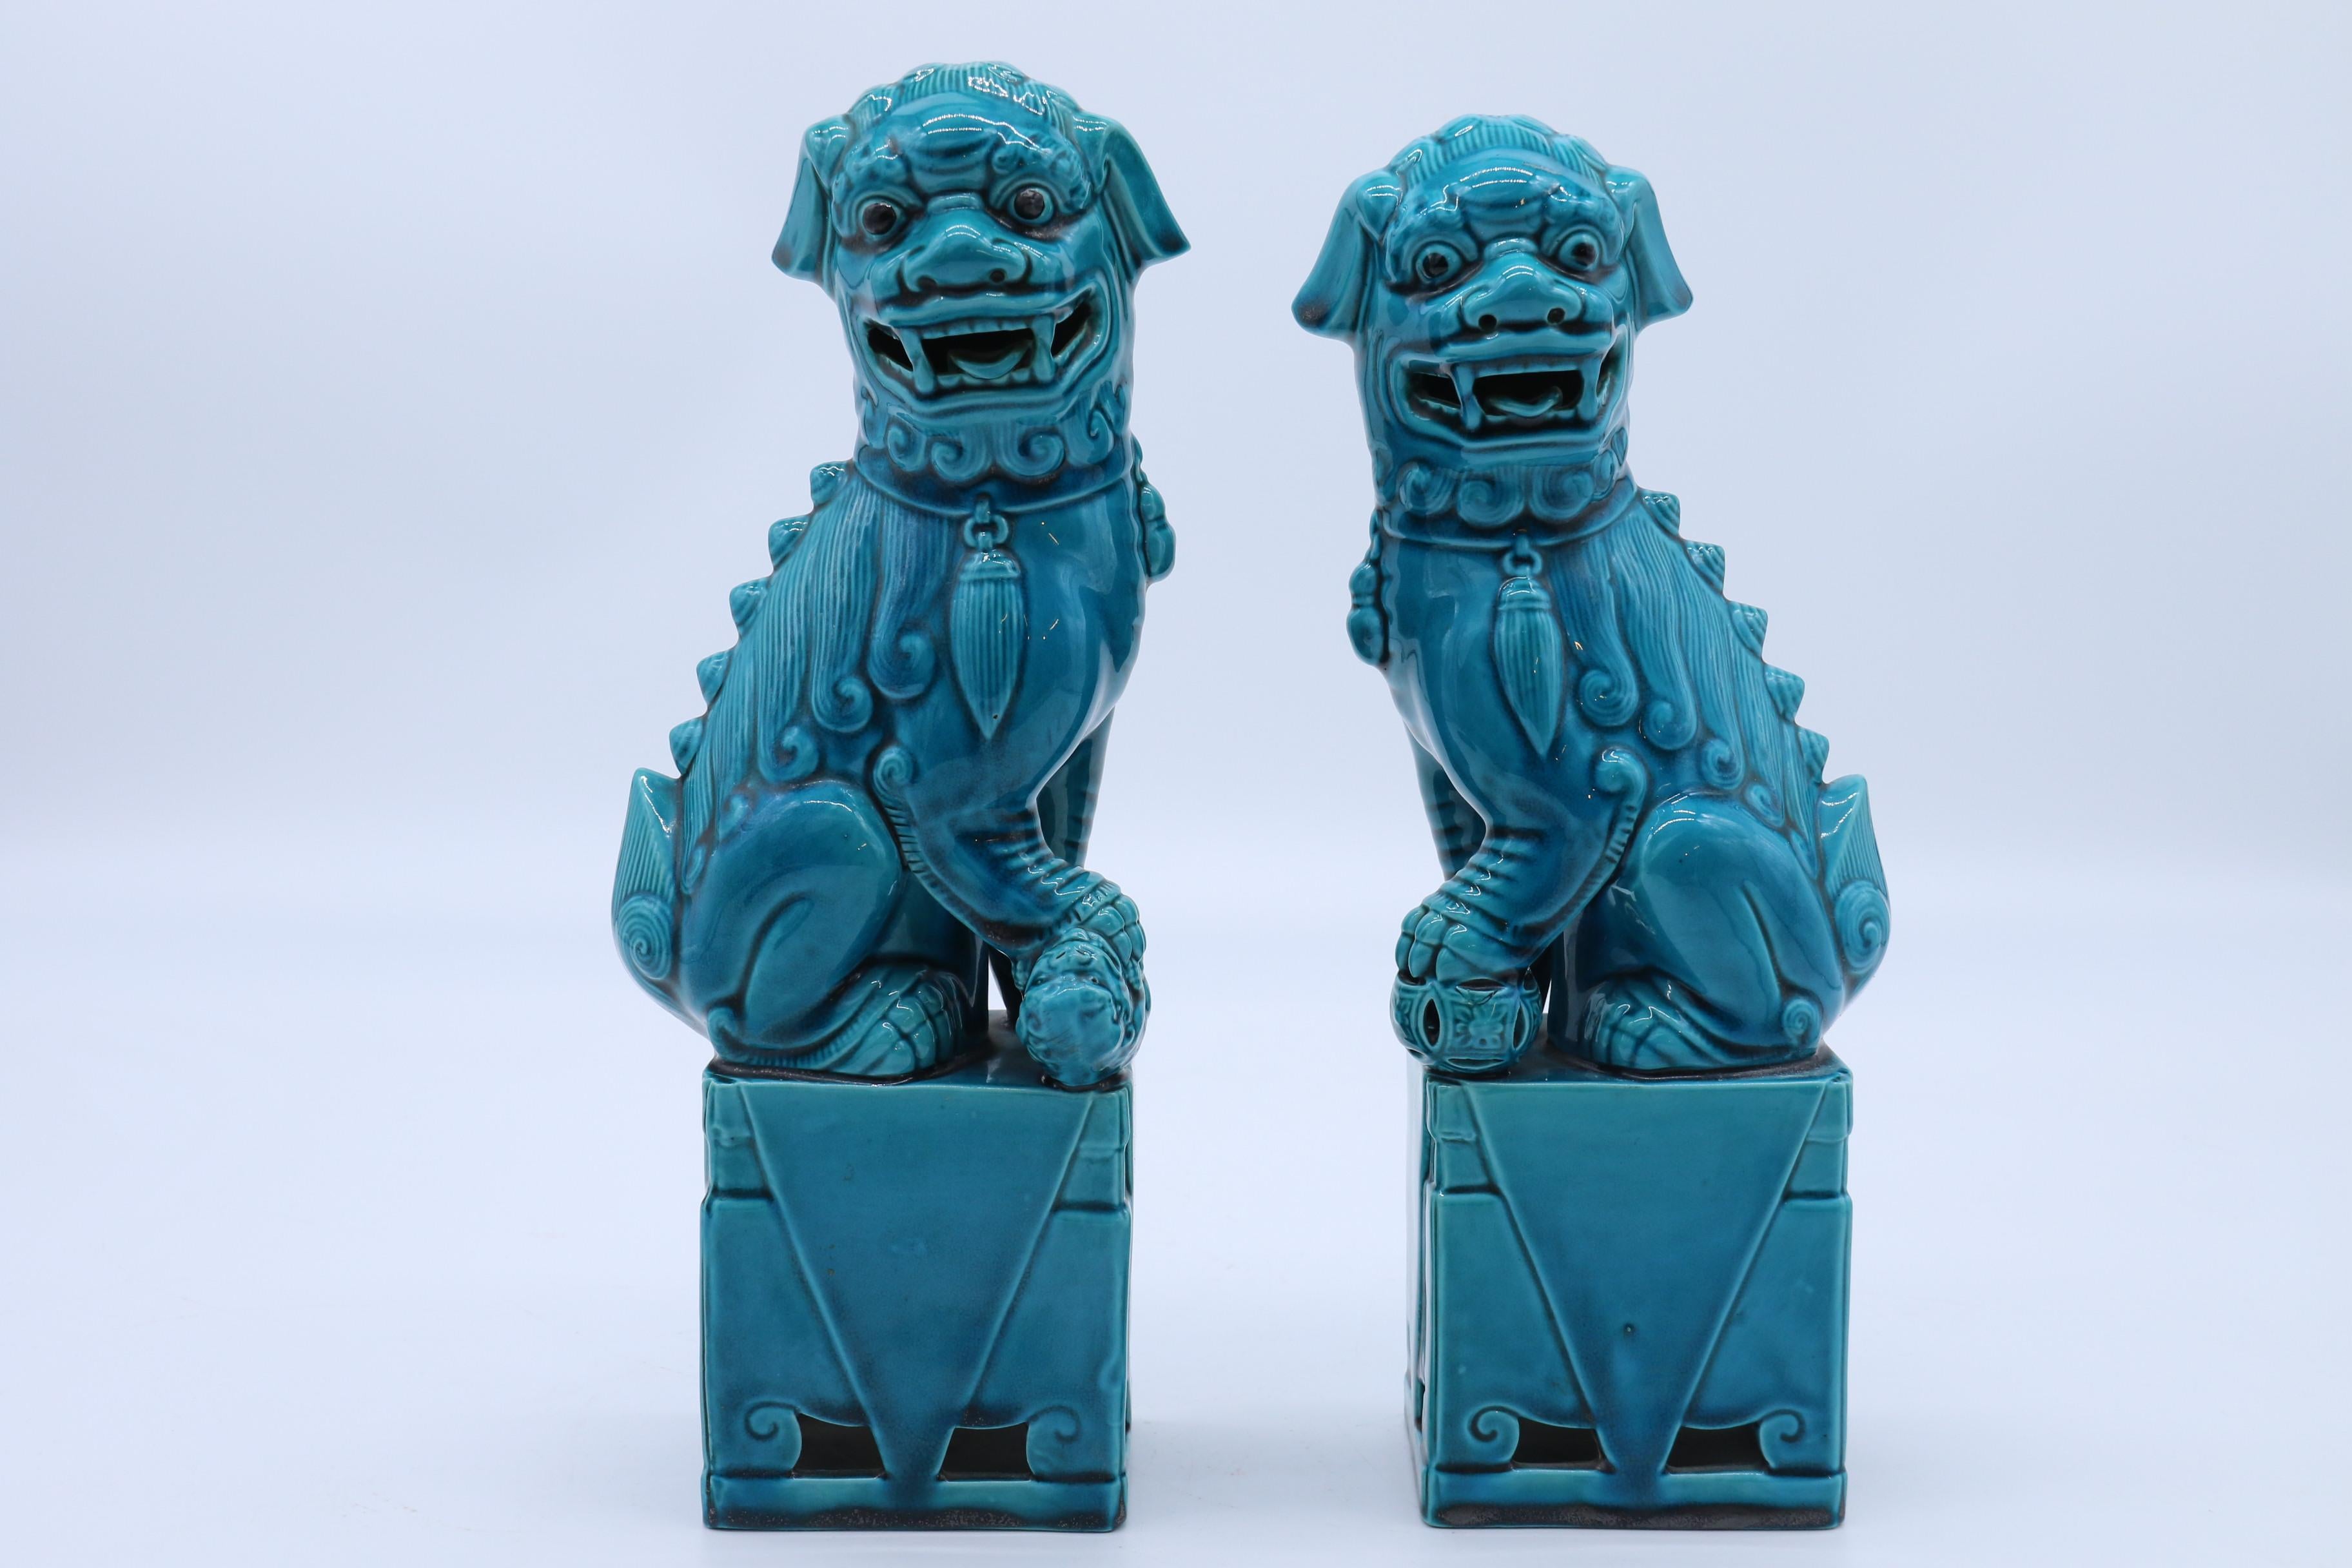 This highly decorative pair of porcelain figures are beautifully modelled with very good detail and depict a pair of Chinese temple Buddhist lions in the classical pose each sitting on a rectangular pedestal with one paw raised. The male is resting